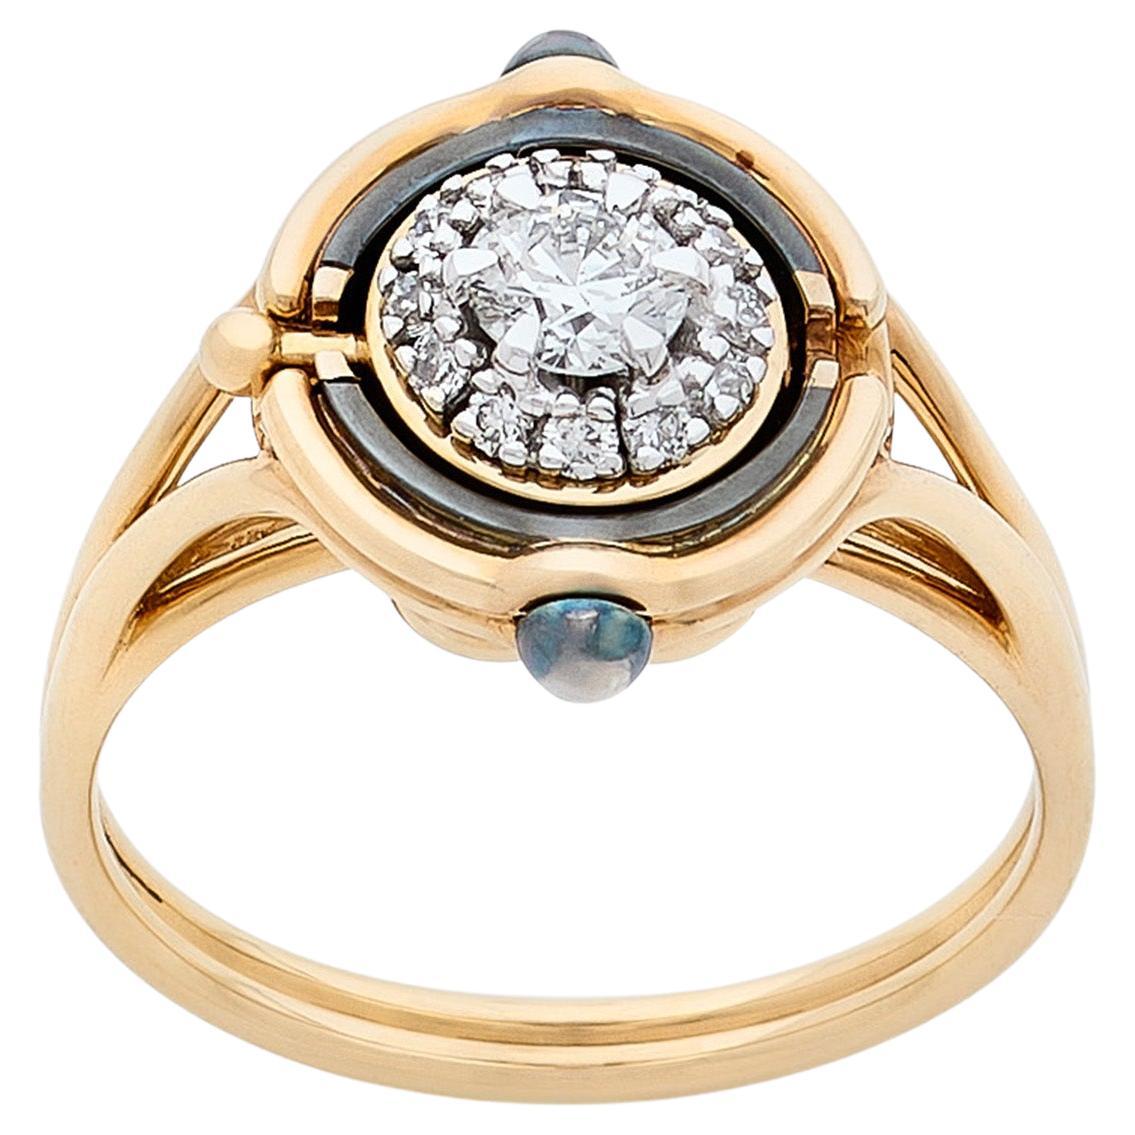 Mira Diamond Ring in 18k Yellow Gold by Elie Top